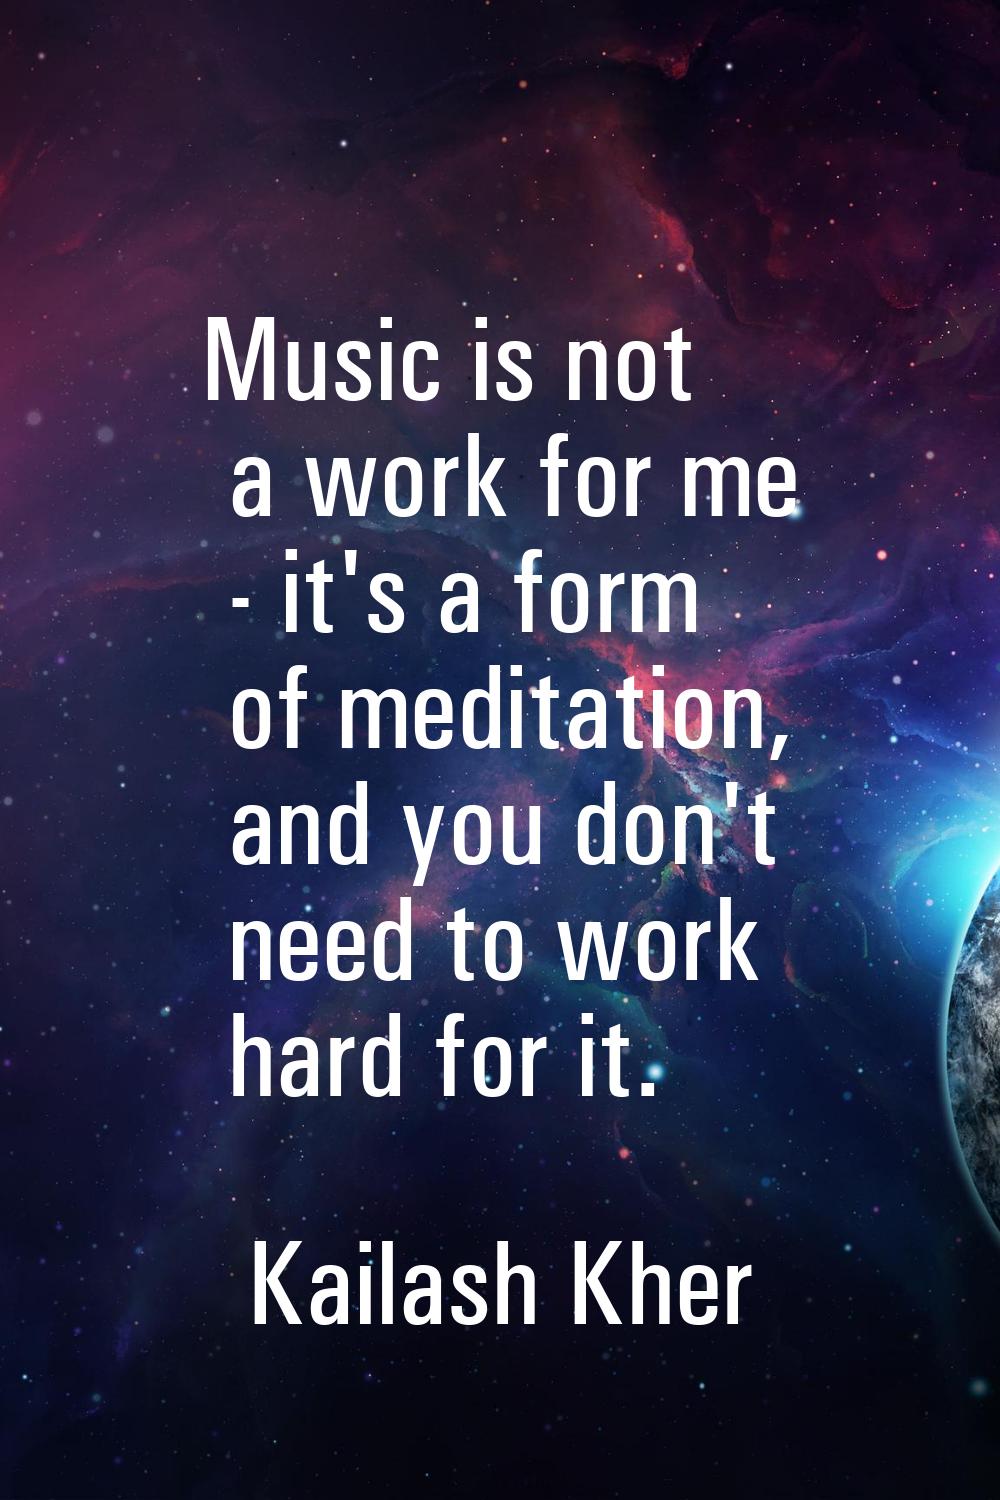 Music is not a work for me - it's a form of meditation, and you don't need to work hard for it.